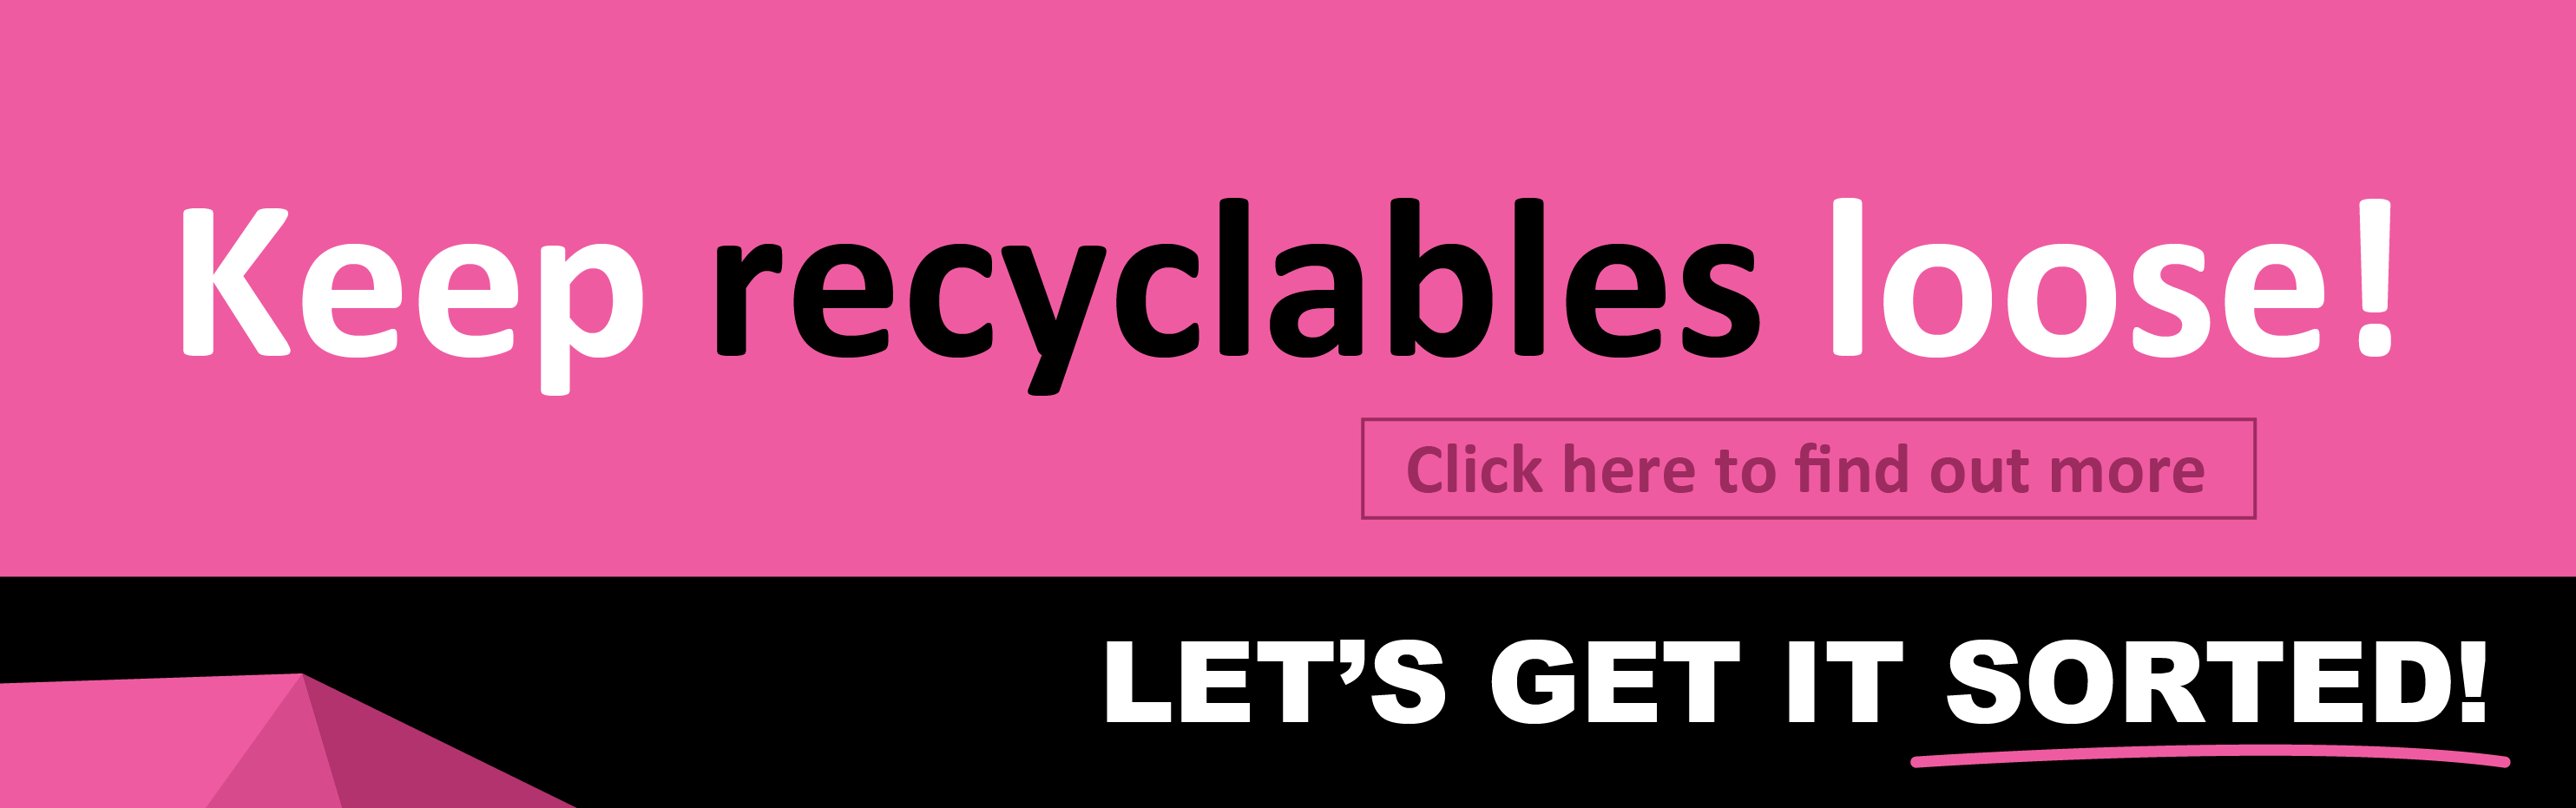 Keep recyclables loose! Let's get it sorted.